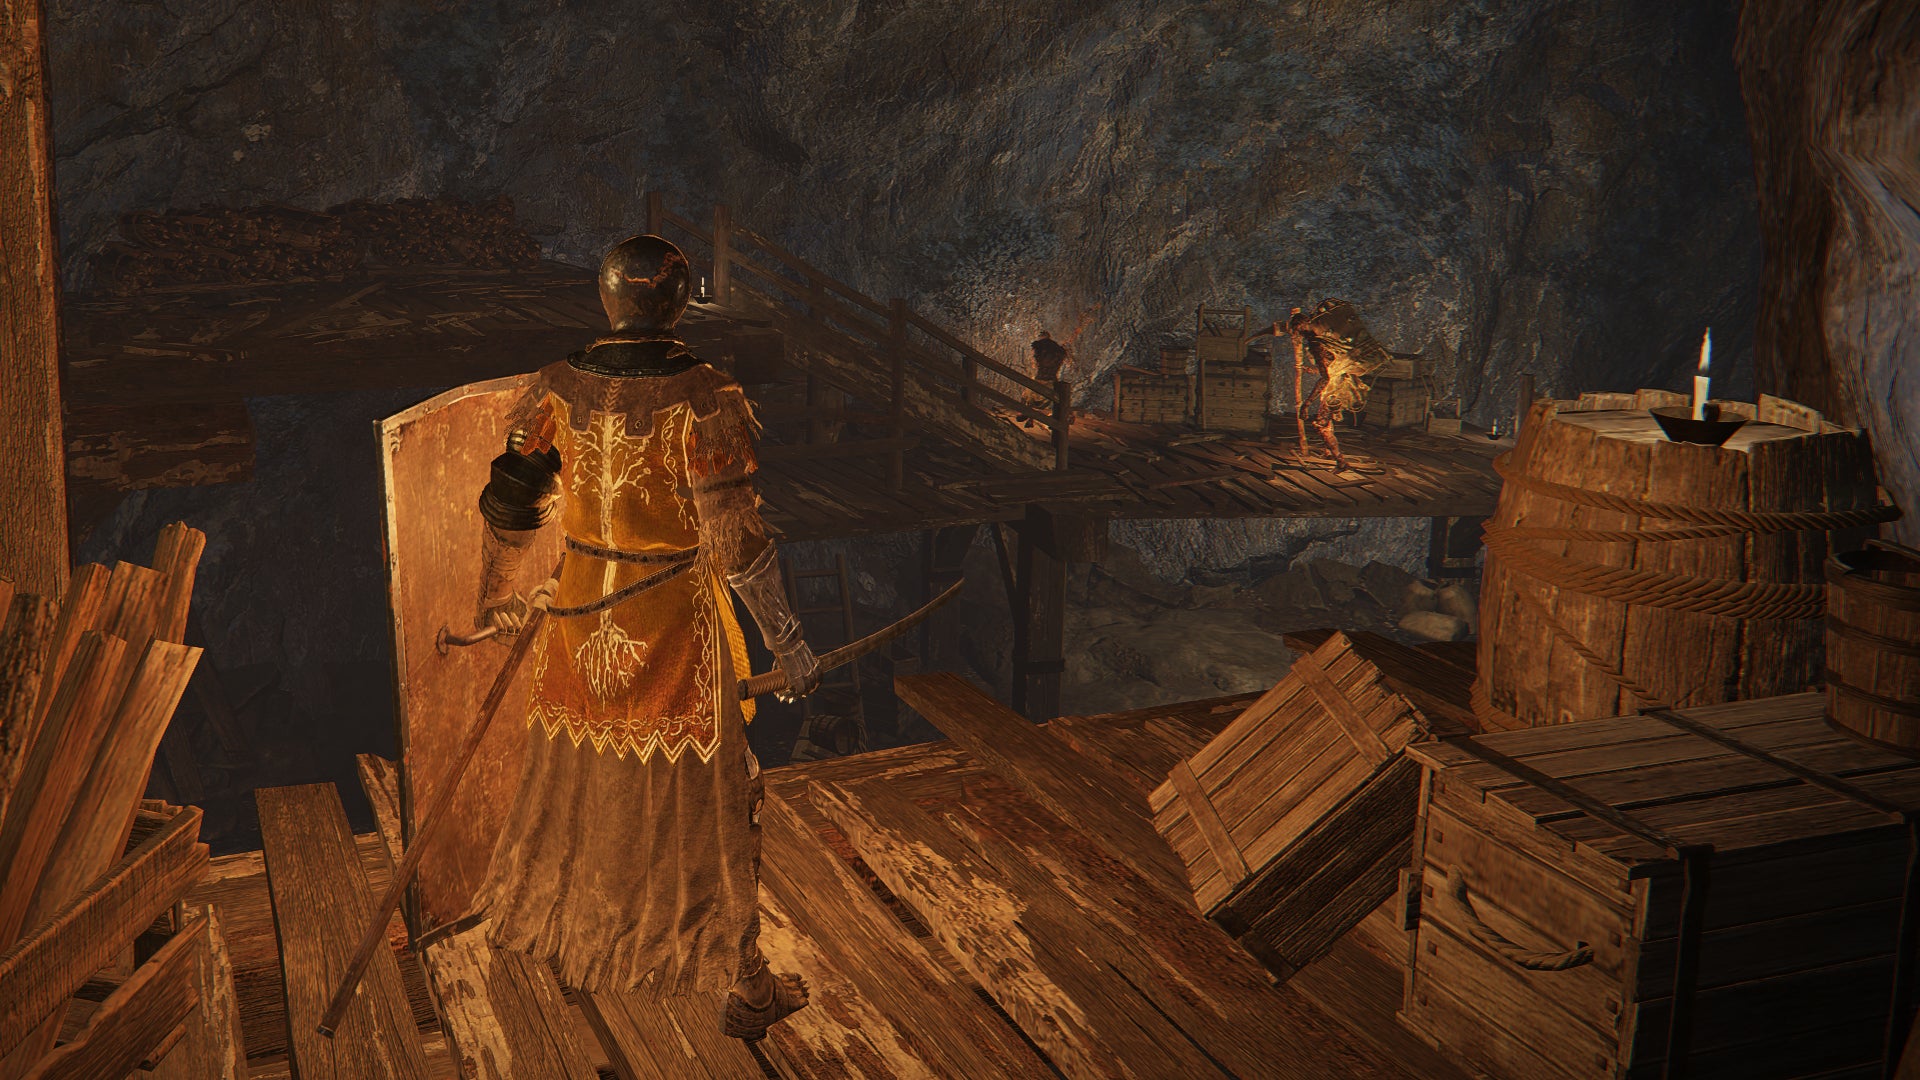 A mining cave in Elden Ring. The player stands on a wooden platform in the foreground, watching miner enemies at work in the background.